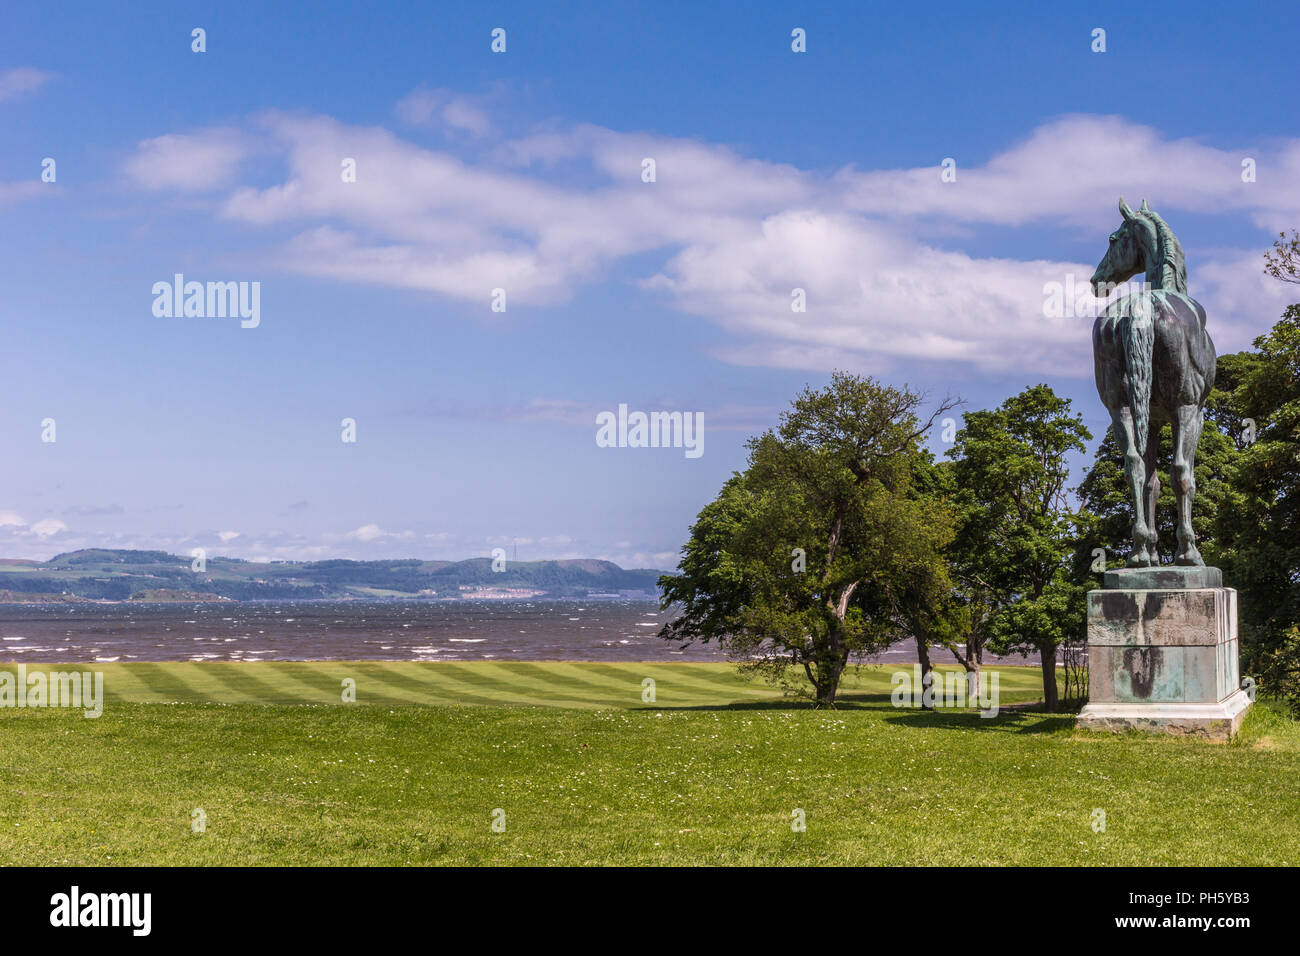 Edinburgh, Scotland, UK - June 14, 2012: Horse statue of King Tom looking at Firth of Forth on green lawn under blue sky at Dalmeny House. Stock Photo